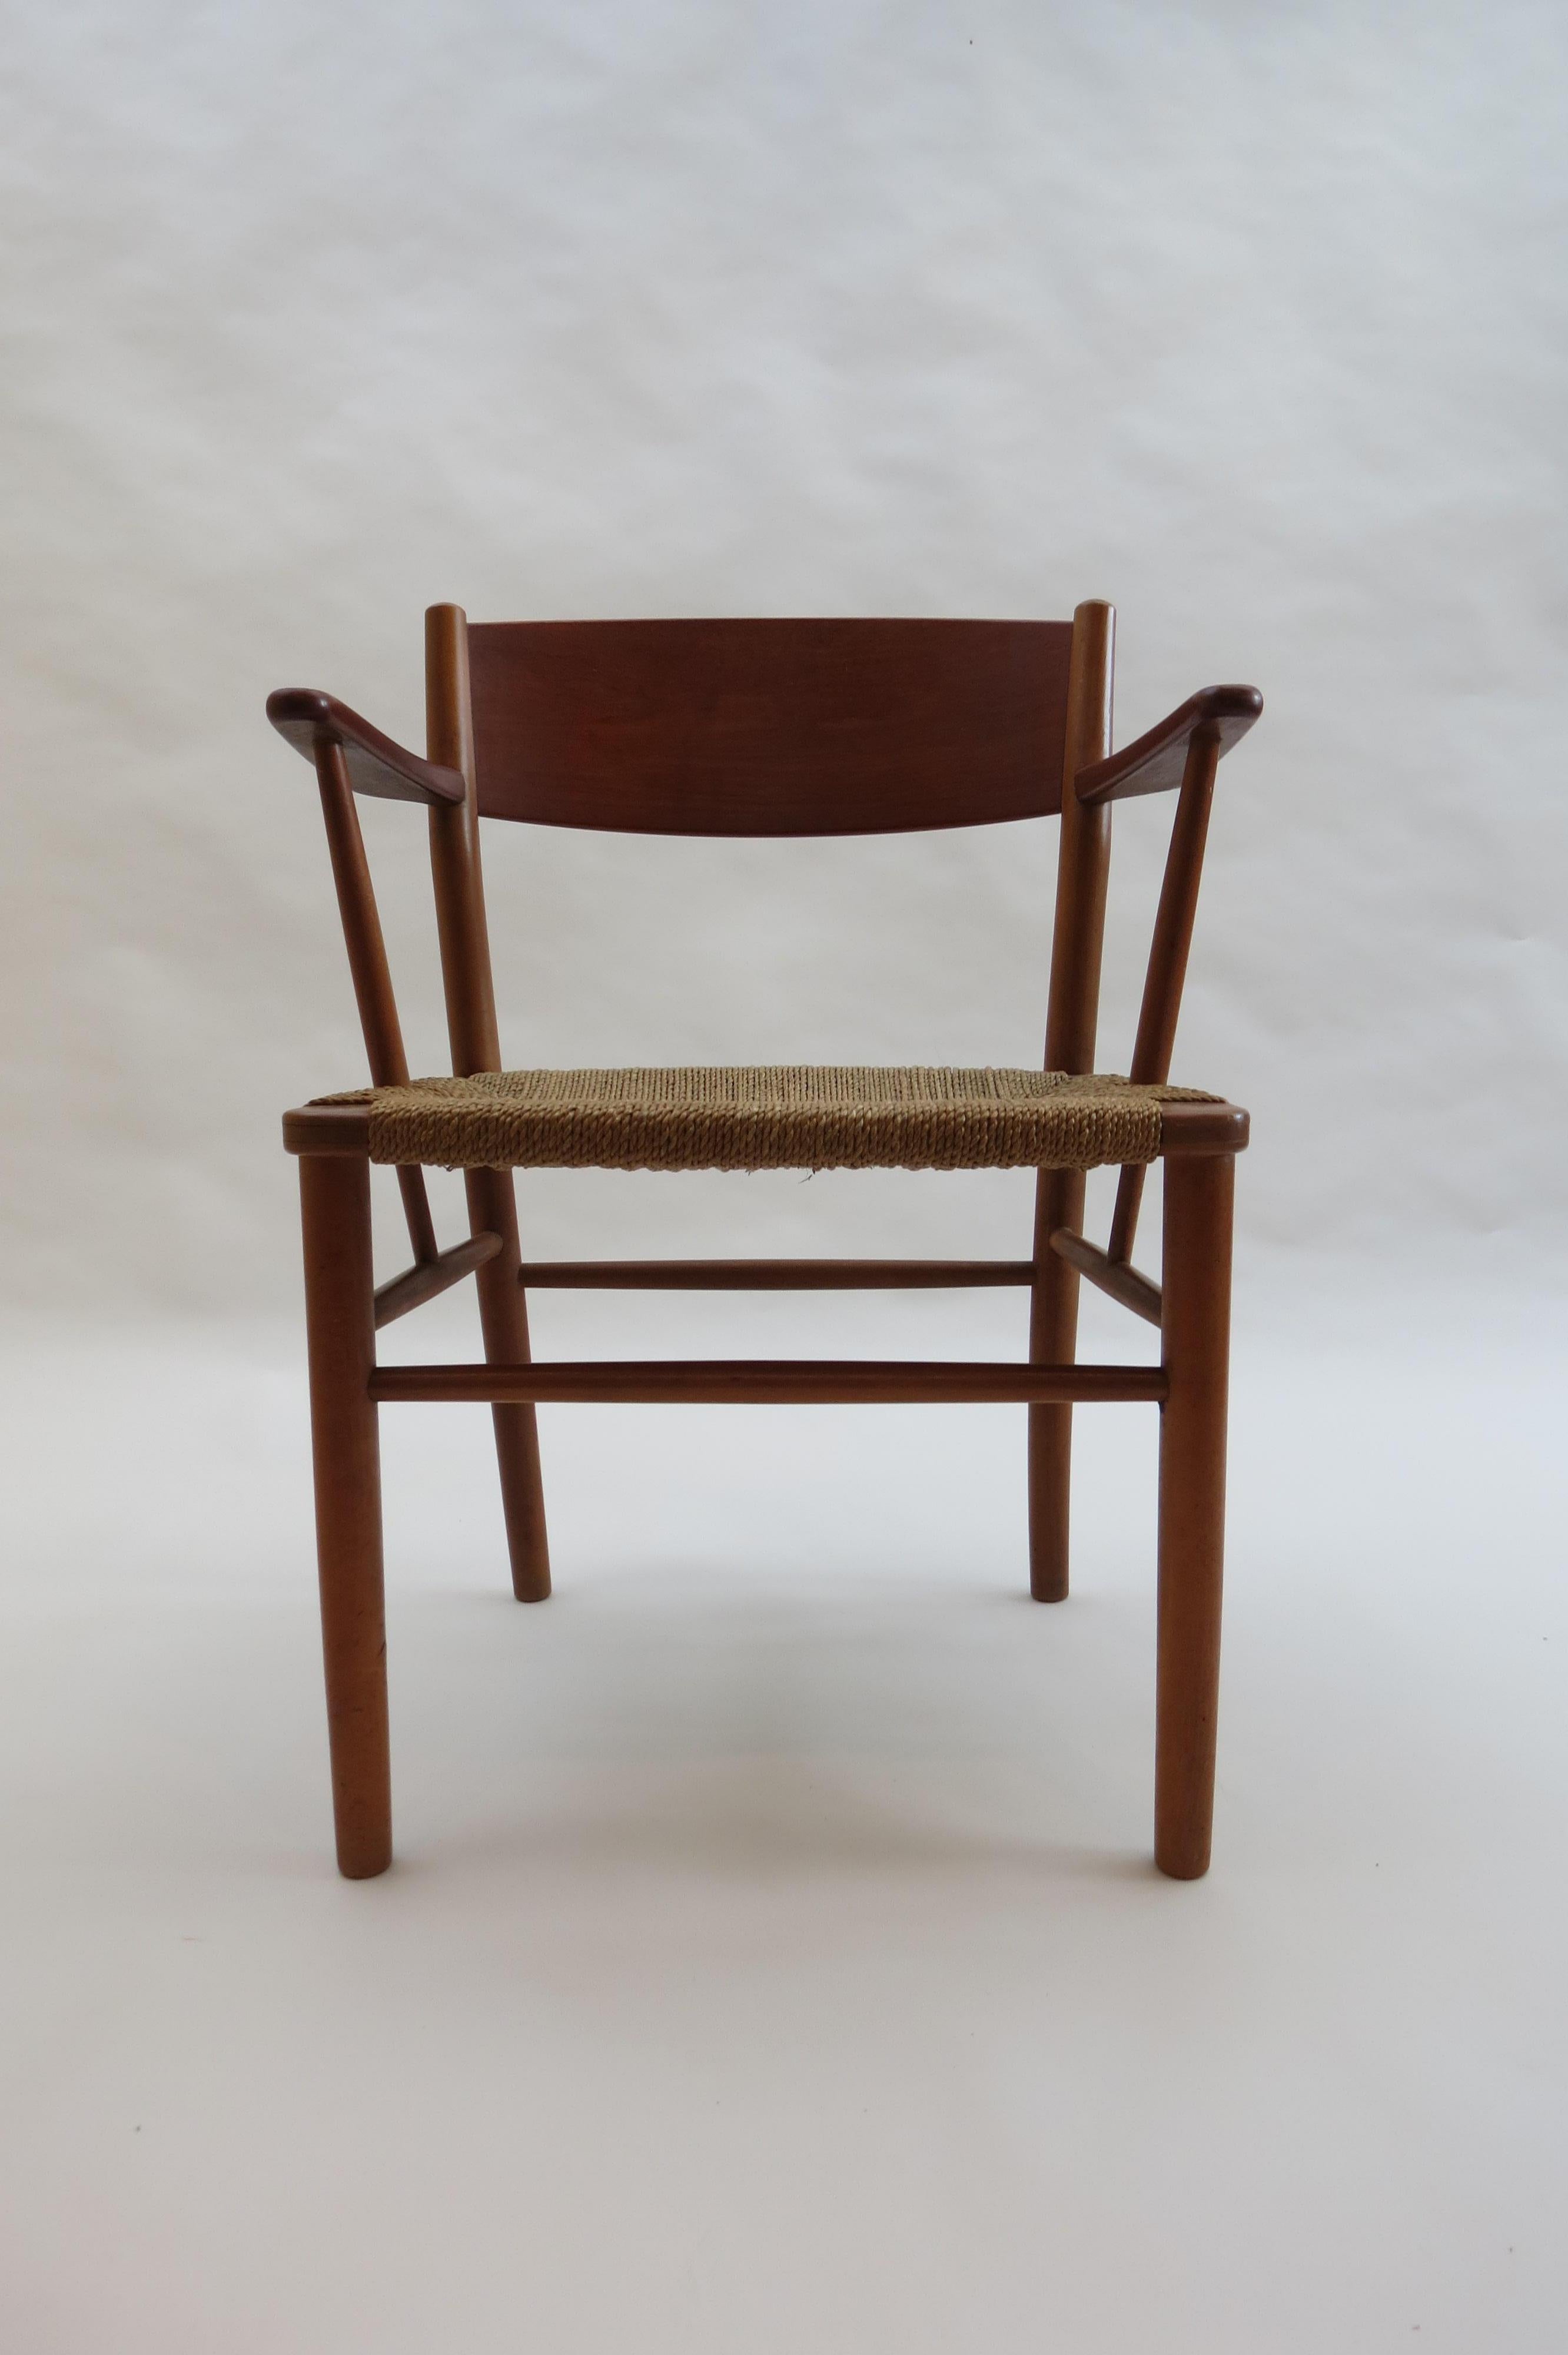 Chair designed by Borge Mogensen and manufactured by Soborg Mobler, Denmark.  Model No 156.

Dates from the 1950s.  In very good condition, retains the original finish and cord seat. Lovely detail on the top of the front legs.

Made from Teak